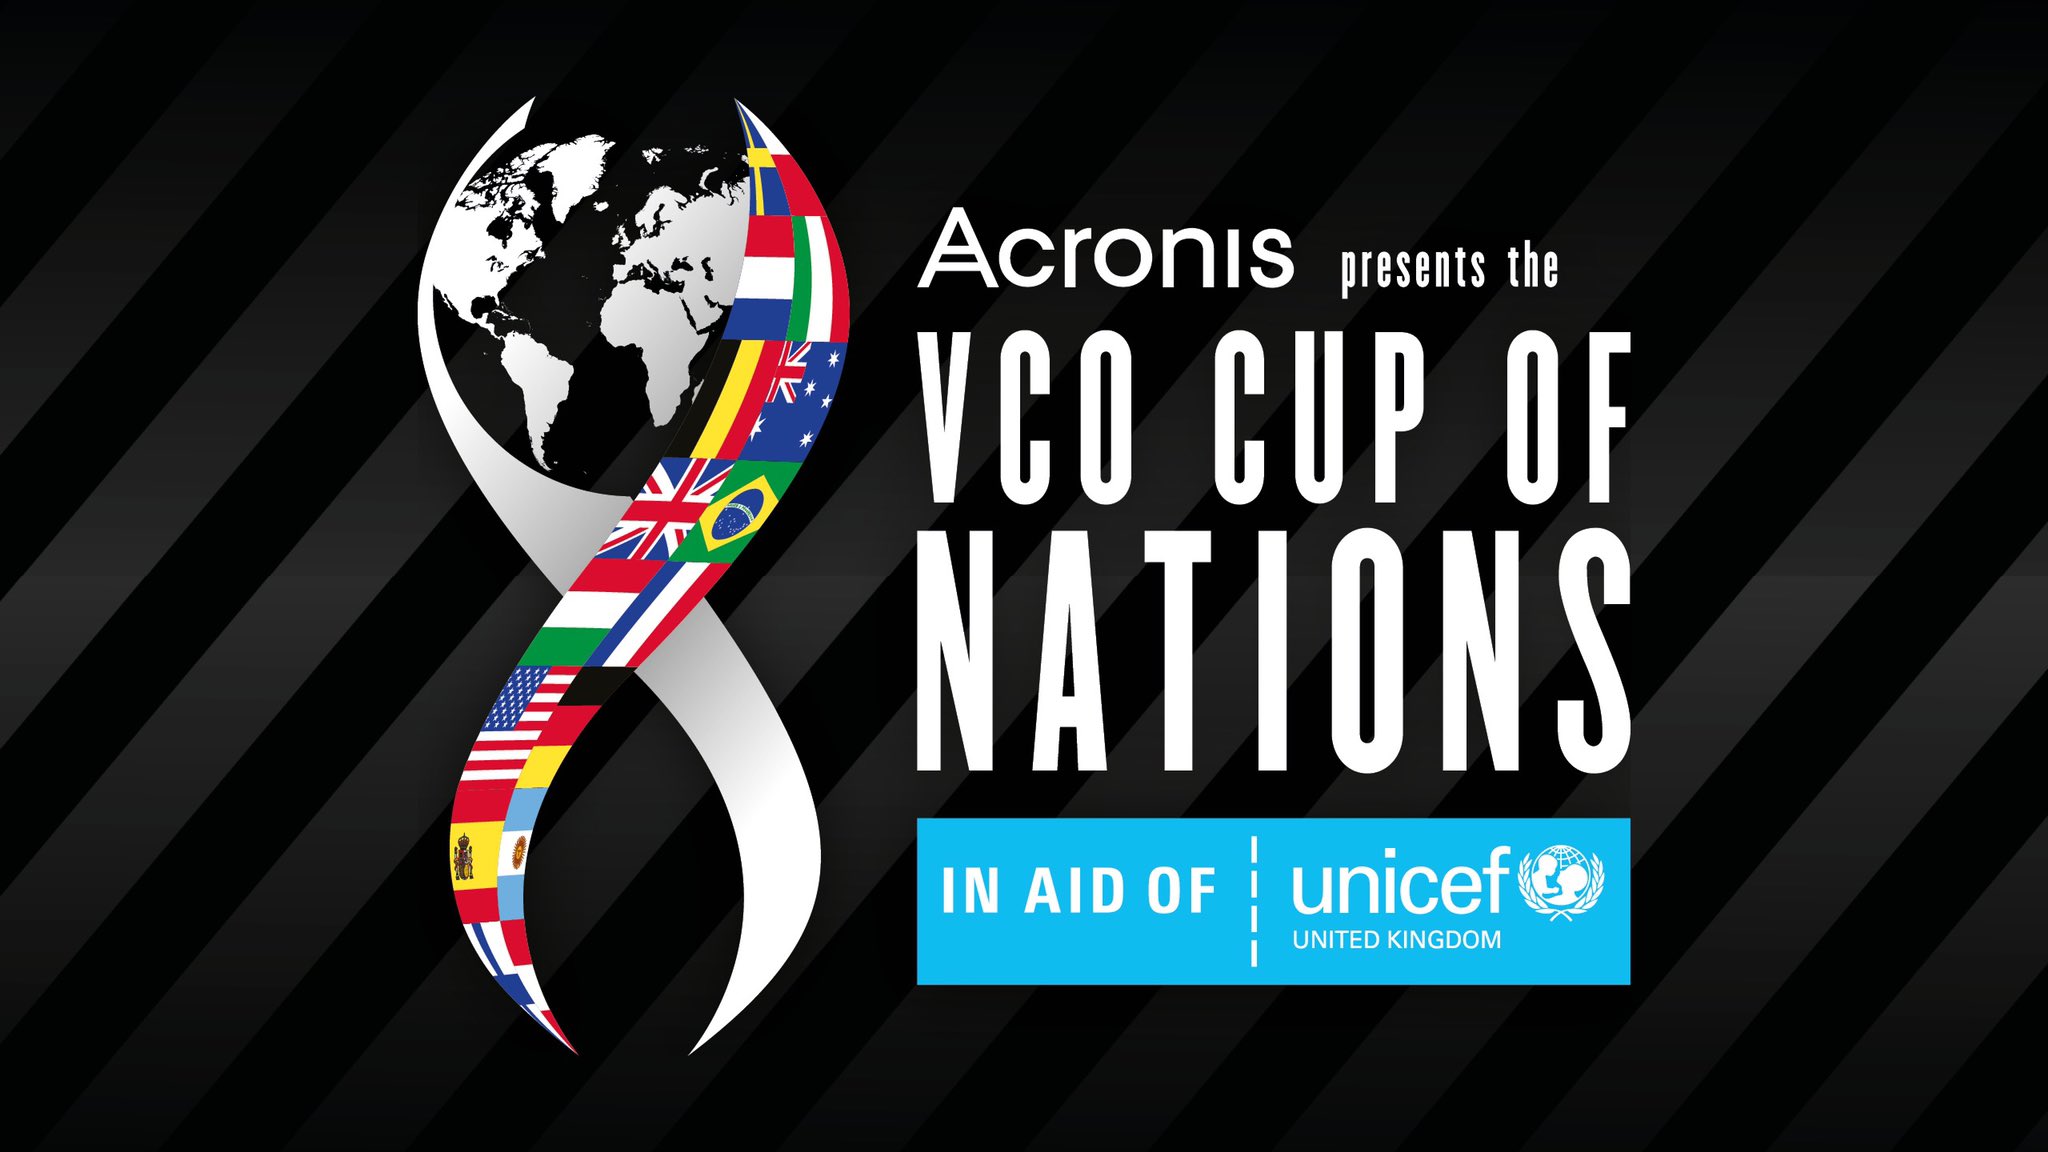 File:VCOCupofNations.jpg